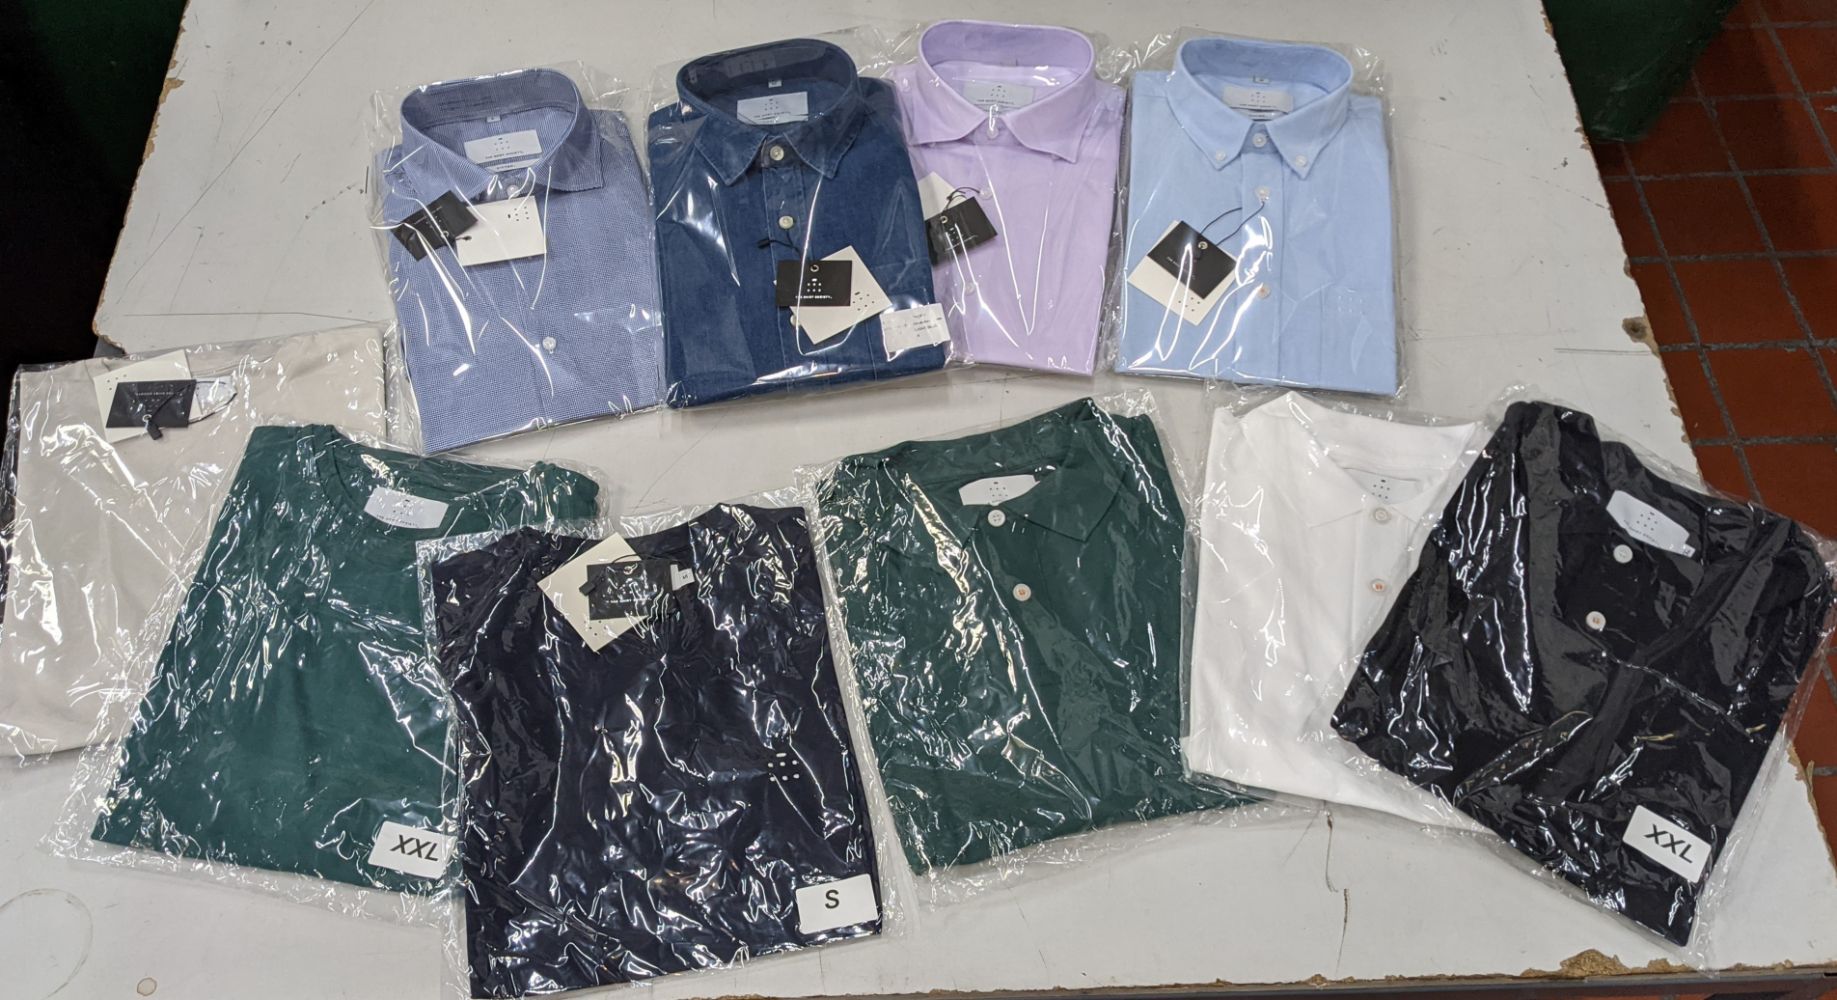 Insolvency Sale: 6,661 Mens Cotton Formal Shirts, Polo Shirts & T-Shirts. To be sold in large trade size lots.